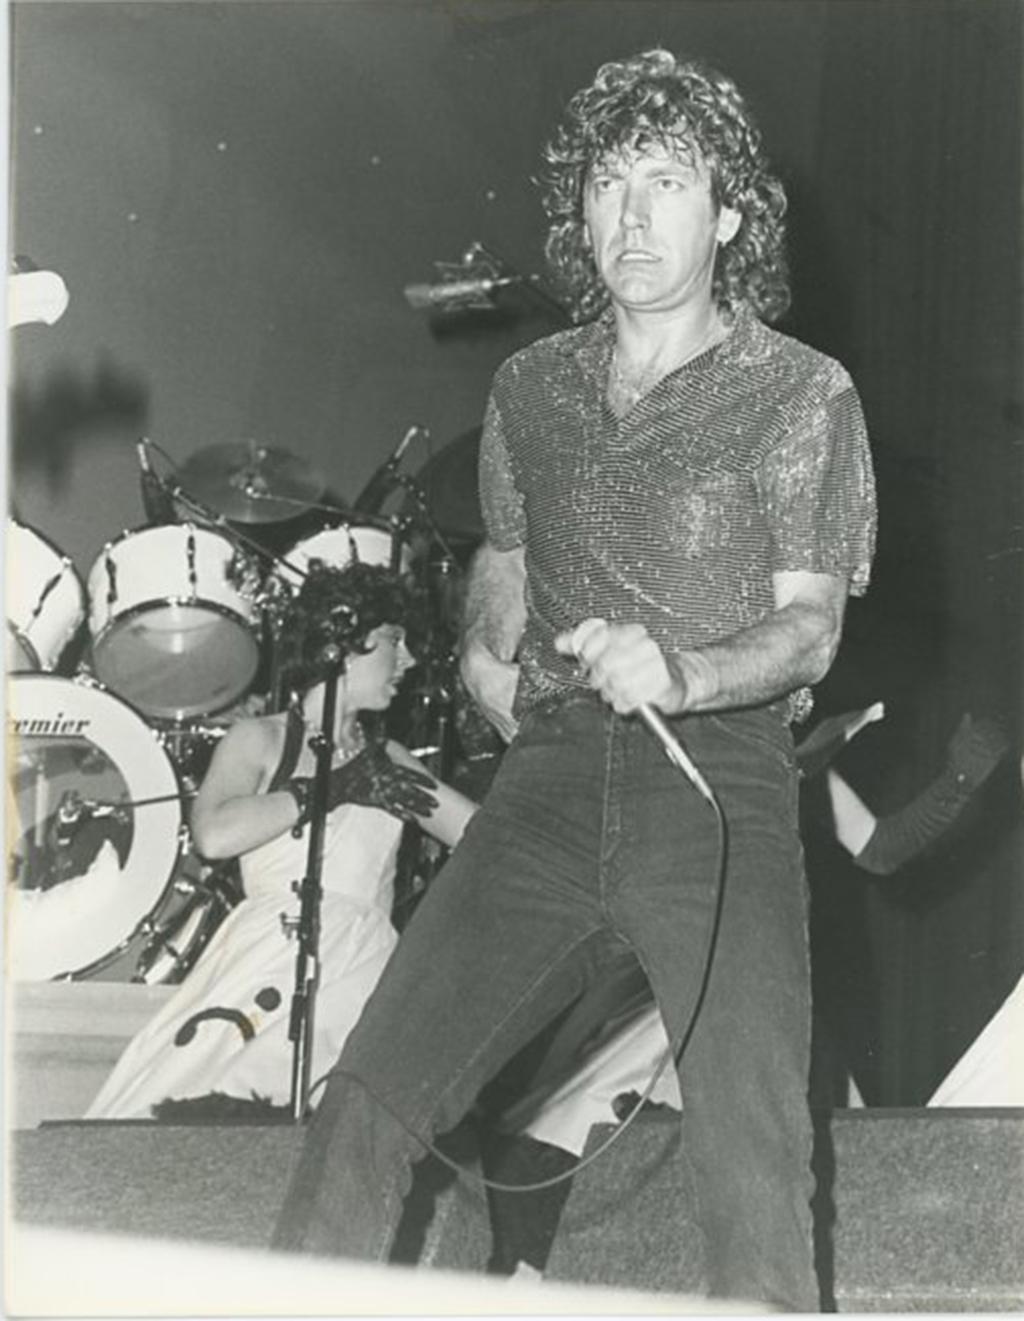 Steve Granitz Black and White Photograph - Robert Plant Performing at the Los Angeles Forum 1985 Press Print